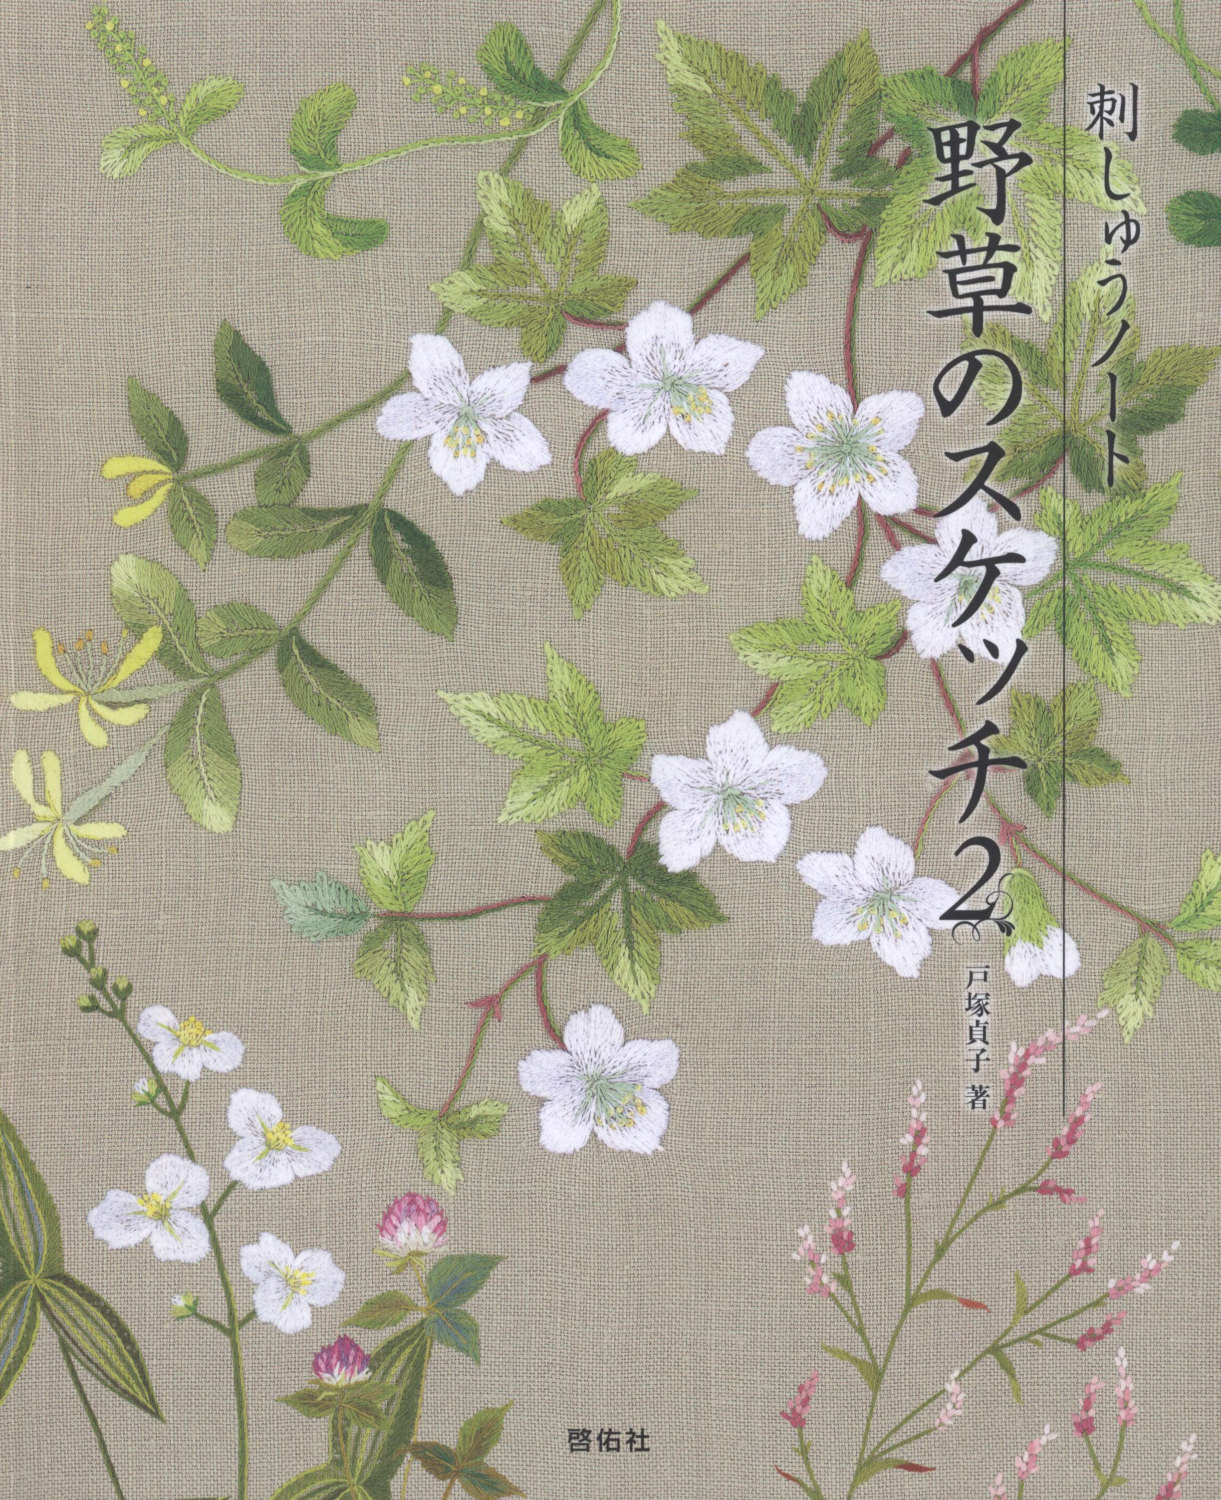 Flower Embroidery Pattern 59 Embroidery Patterns Flower Embroidery Embroidery Pattern Botanical Japanese Embroidery Book Ebook Pdf Instant Download